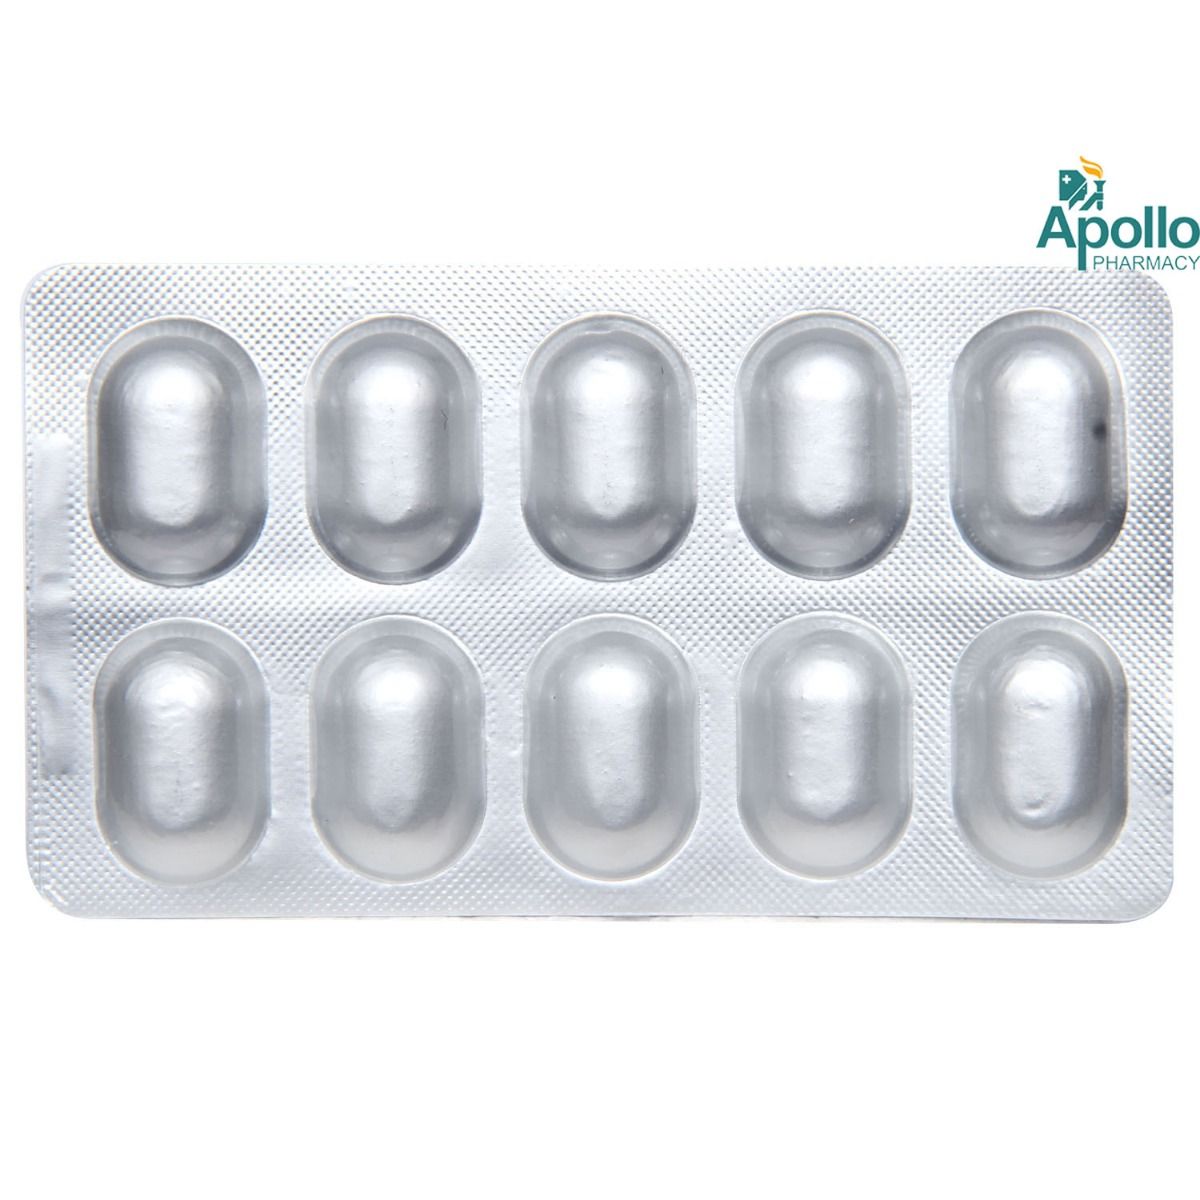 Priglip M 500 Tablet 10 S Price Uses Side Effects Composition Apollo Pharmacy